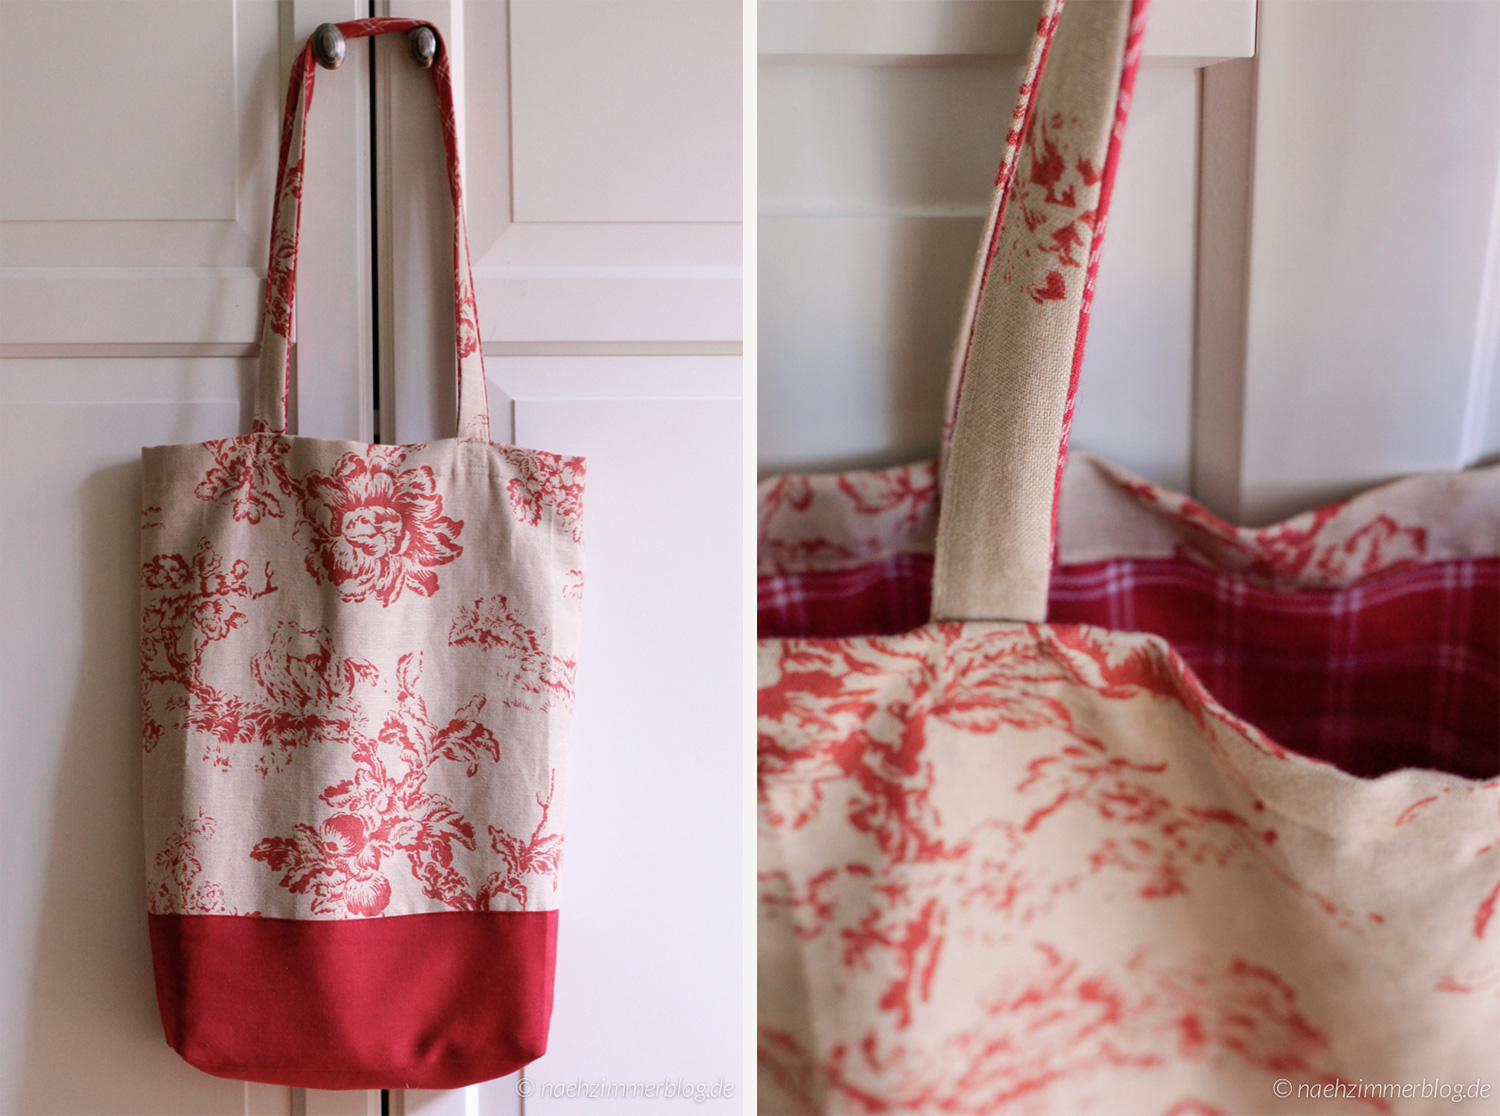 Handmade Floral Tote Bag in Toile de Jouy Fabric